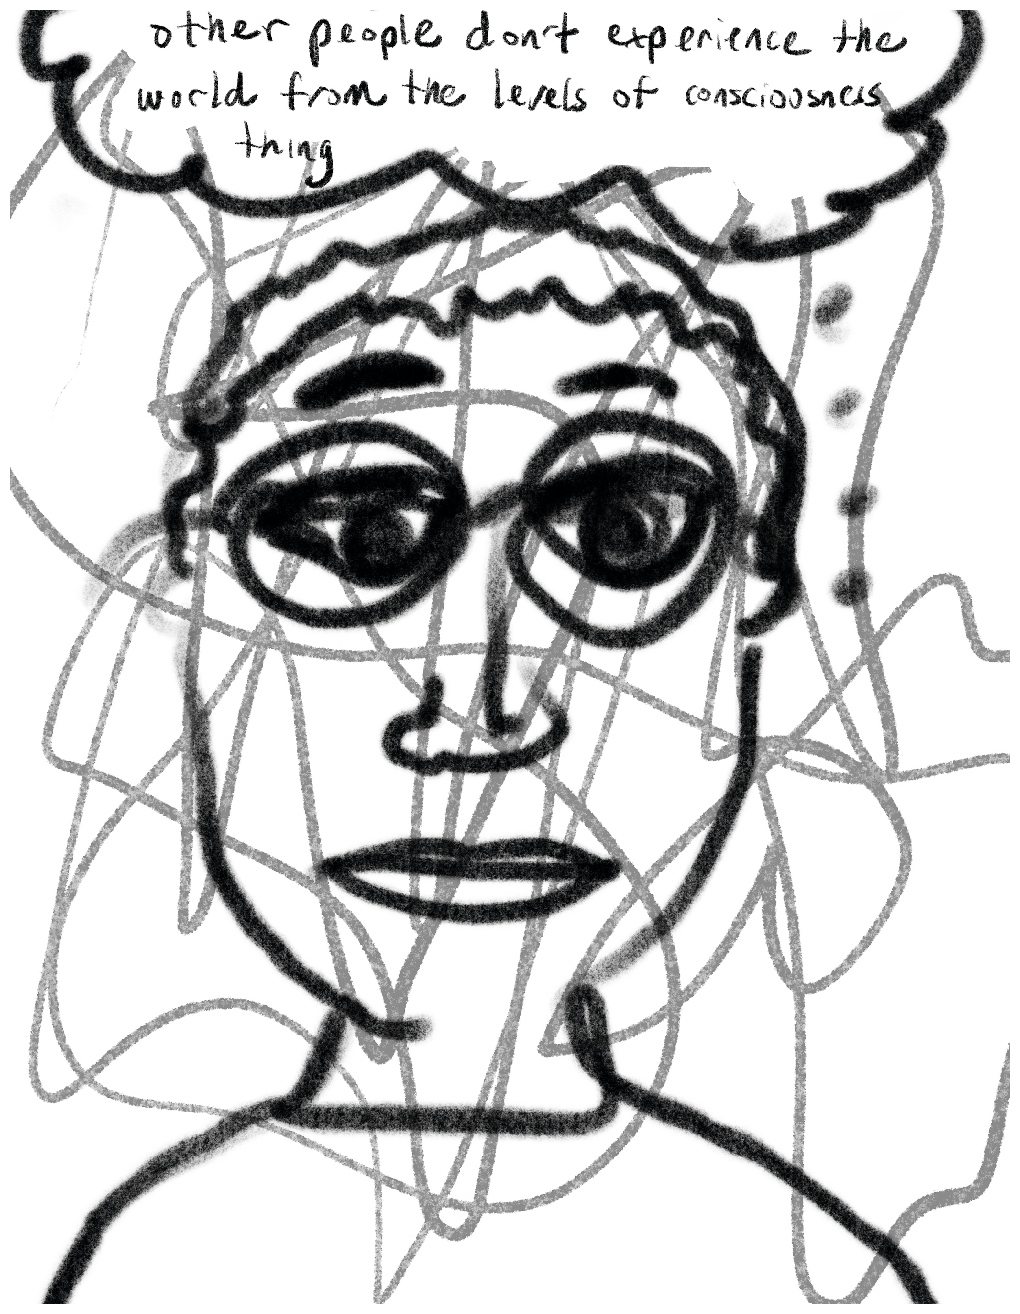 Panel four of a four-panel comic called 'I was hallucinating', consisting of thick black line drawing on a white background. The head and shoulders of a crudely drawn young man with large eyes stares out at the viewer, filling most of the panel. The figure has glasses and short hair. Light grey scribbles are drawn all over the panel, cutting across the figure. A thought bubble above his head says "Other people don't experience the world from the levels of consciousness thing".